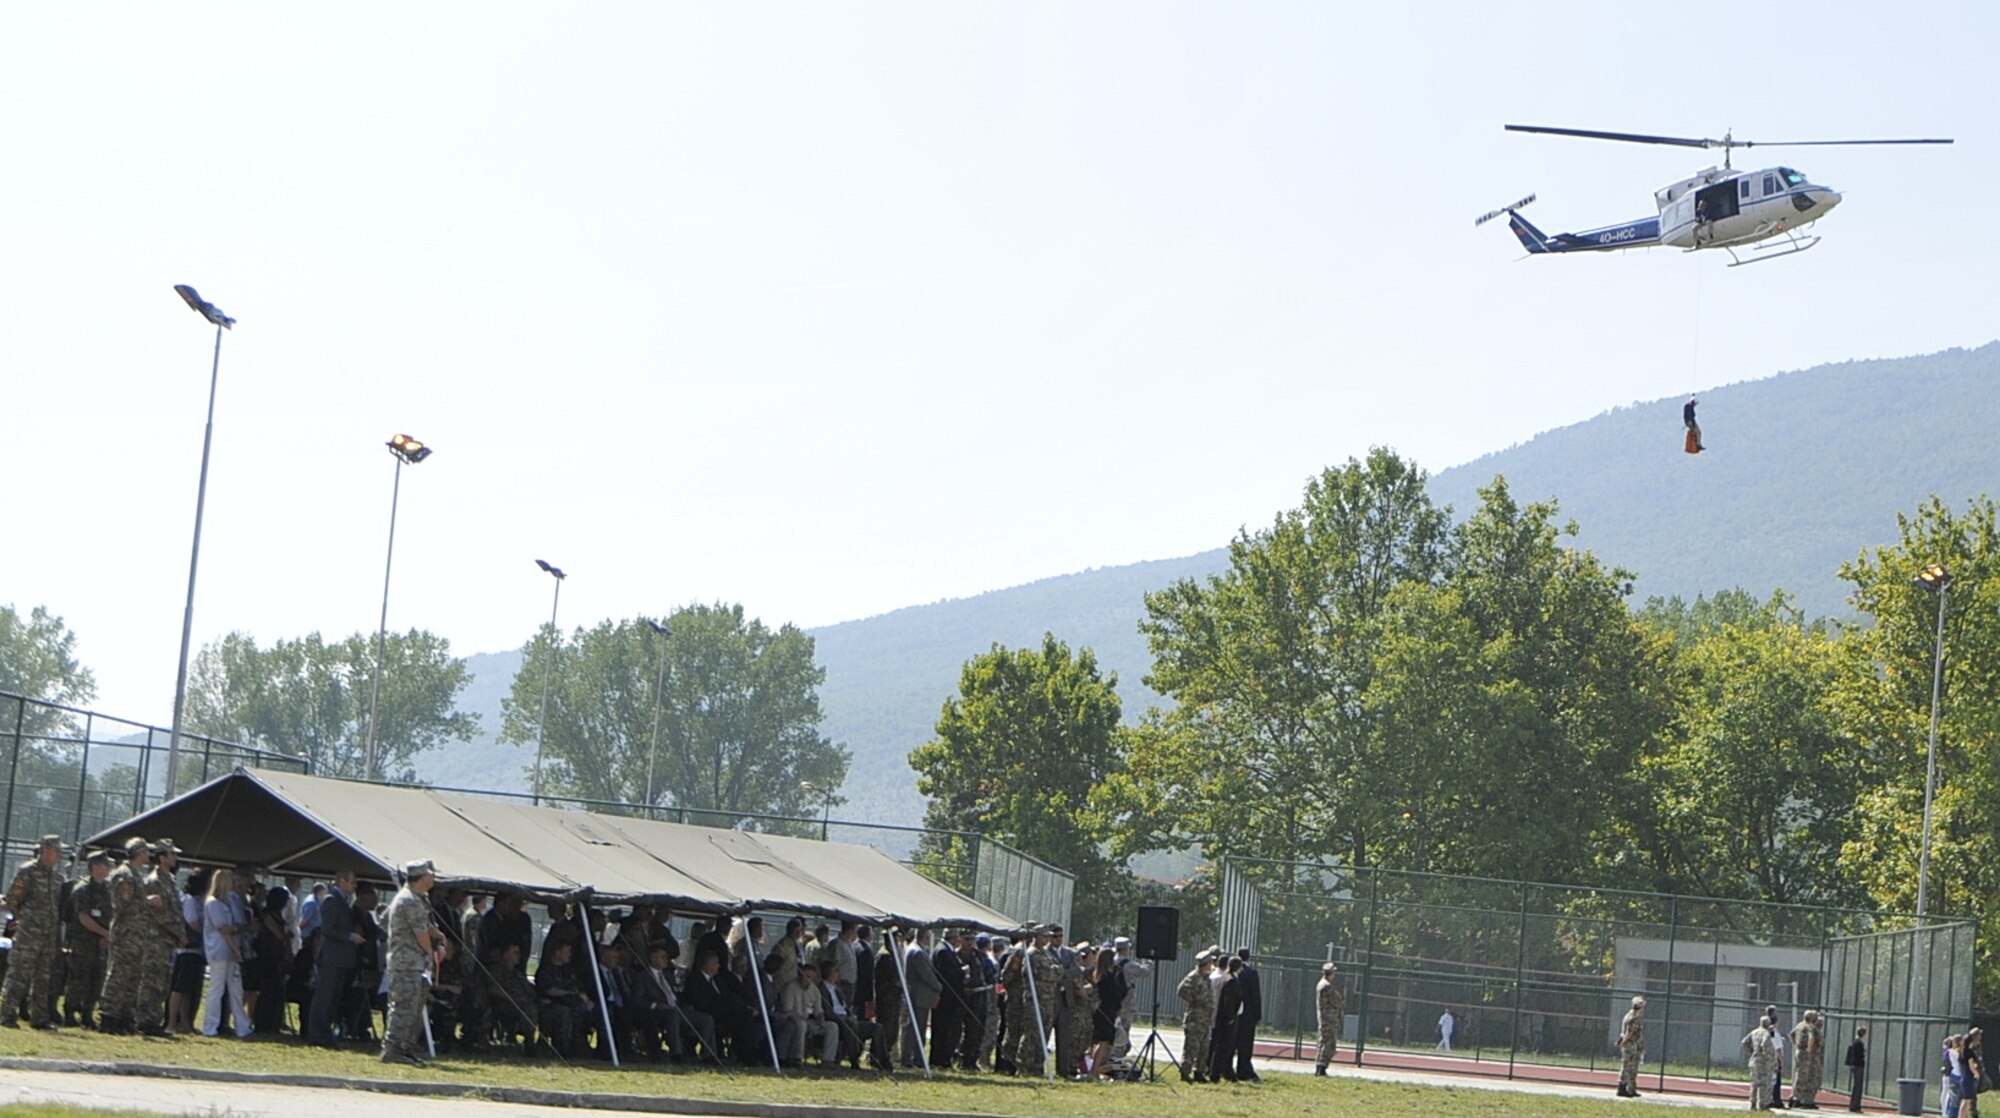 Montenegrin ministers, flag officers of participating nations and other distinguished visitors watch an air evacuation demonstration during a mock bridge explosion that is part of MEDCEUR 10, a medical training exercise in central and eastern Europe, at Danilovgrad Army Base, Montenegro, Sept. 17. More than 100 visitors came to see approximately 250 servicemembers from ten nations participate in five medical exercise scenarios. For more information, go to www.usafe.af.mil/medceur.asp and www.odbrana.gov.me. (U.S. Air Force photo/Airman 1st Class Tiffany Deuel)